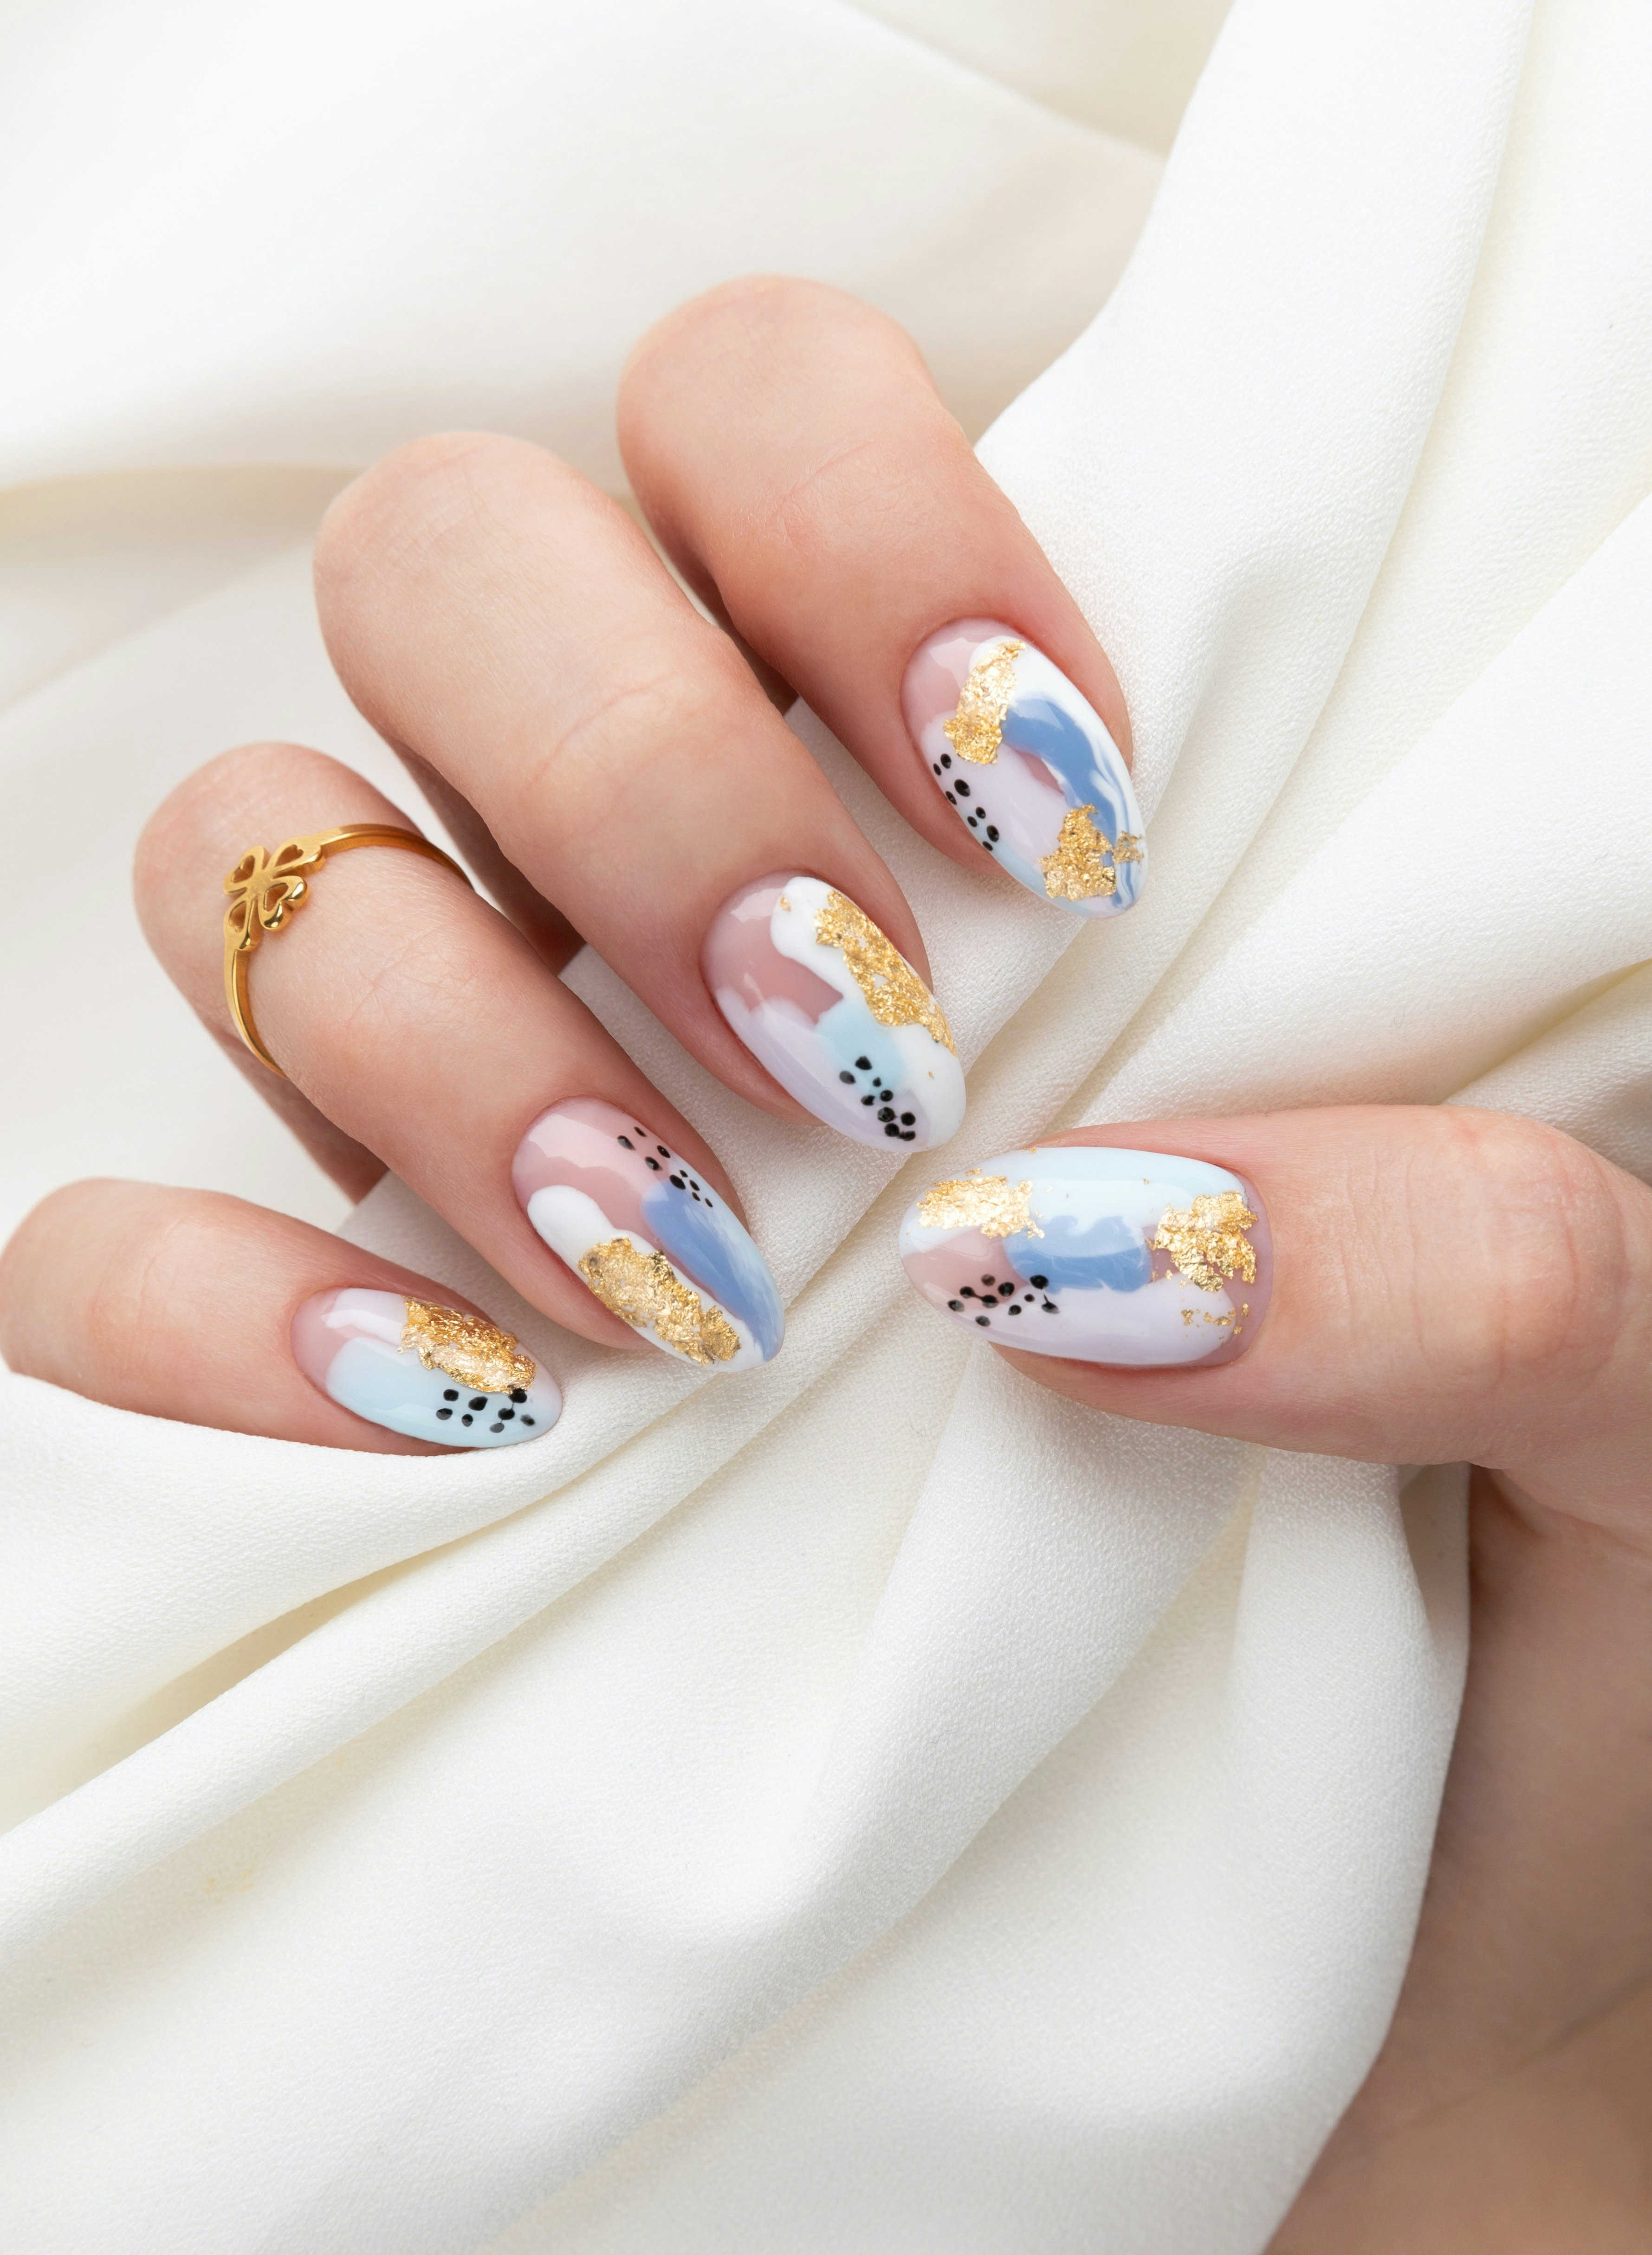 15 Multicolored Spring Nail Designs to Brighten Your Day